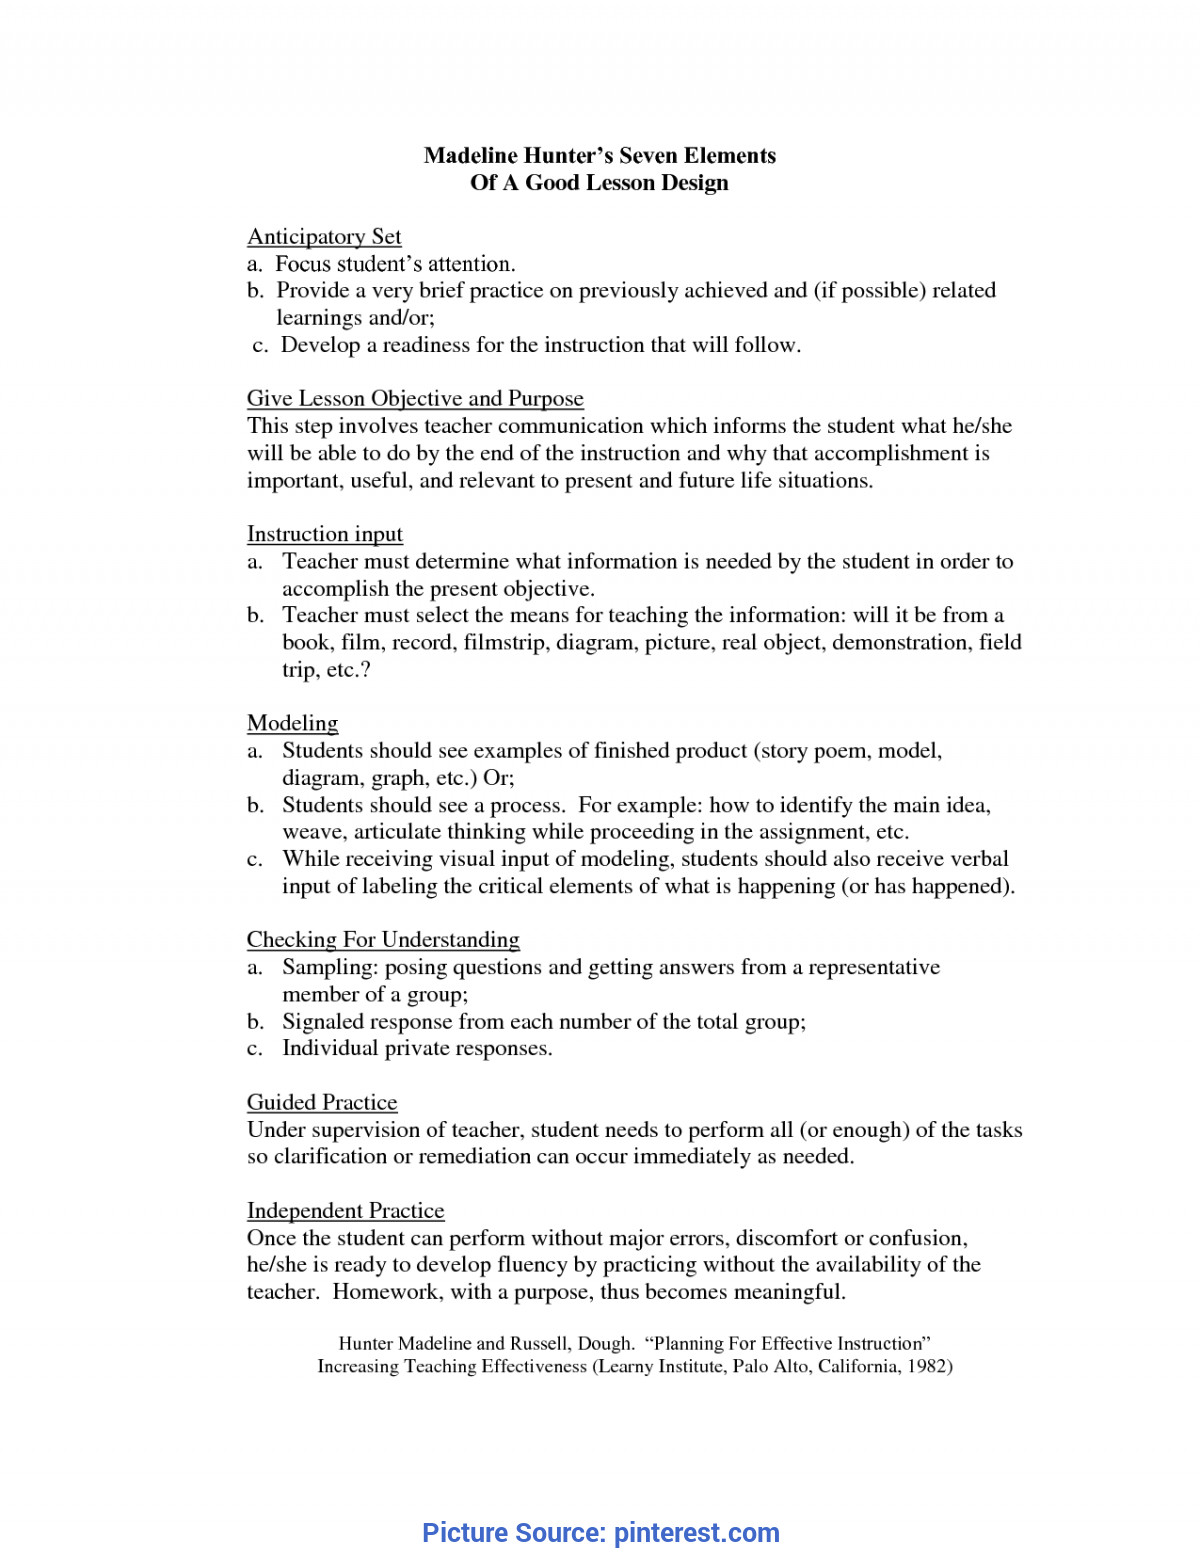 Madeline Hunter Lesson Plan Example Unusual Madeline Hunter Lesson Plan Word Madeline Hunter